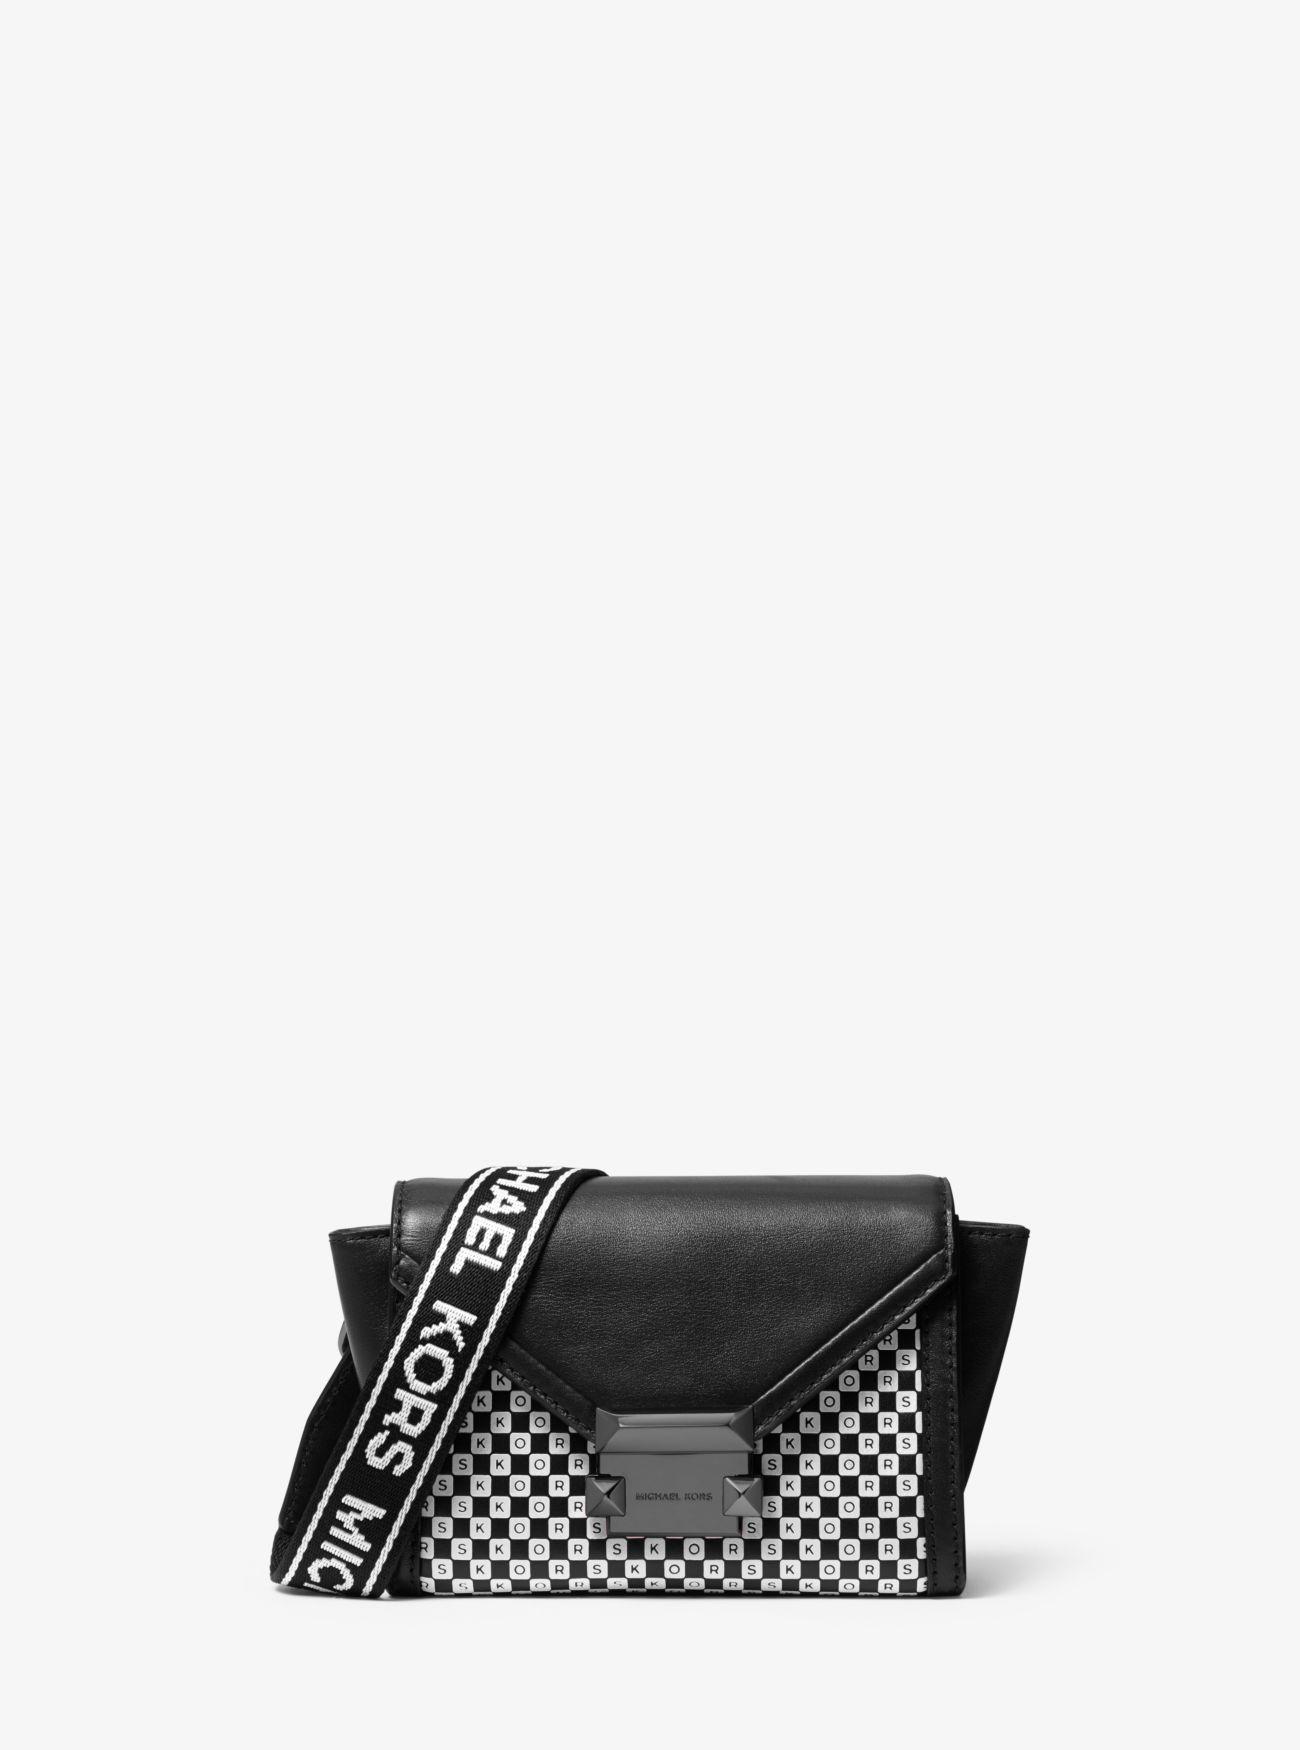 Black And White Checkered Michael Kors Purse Clearance, 51% OFF |  www.ohmychef.cz